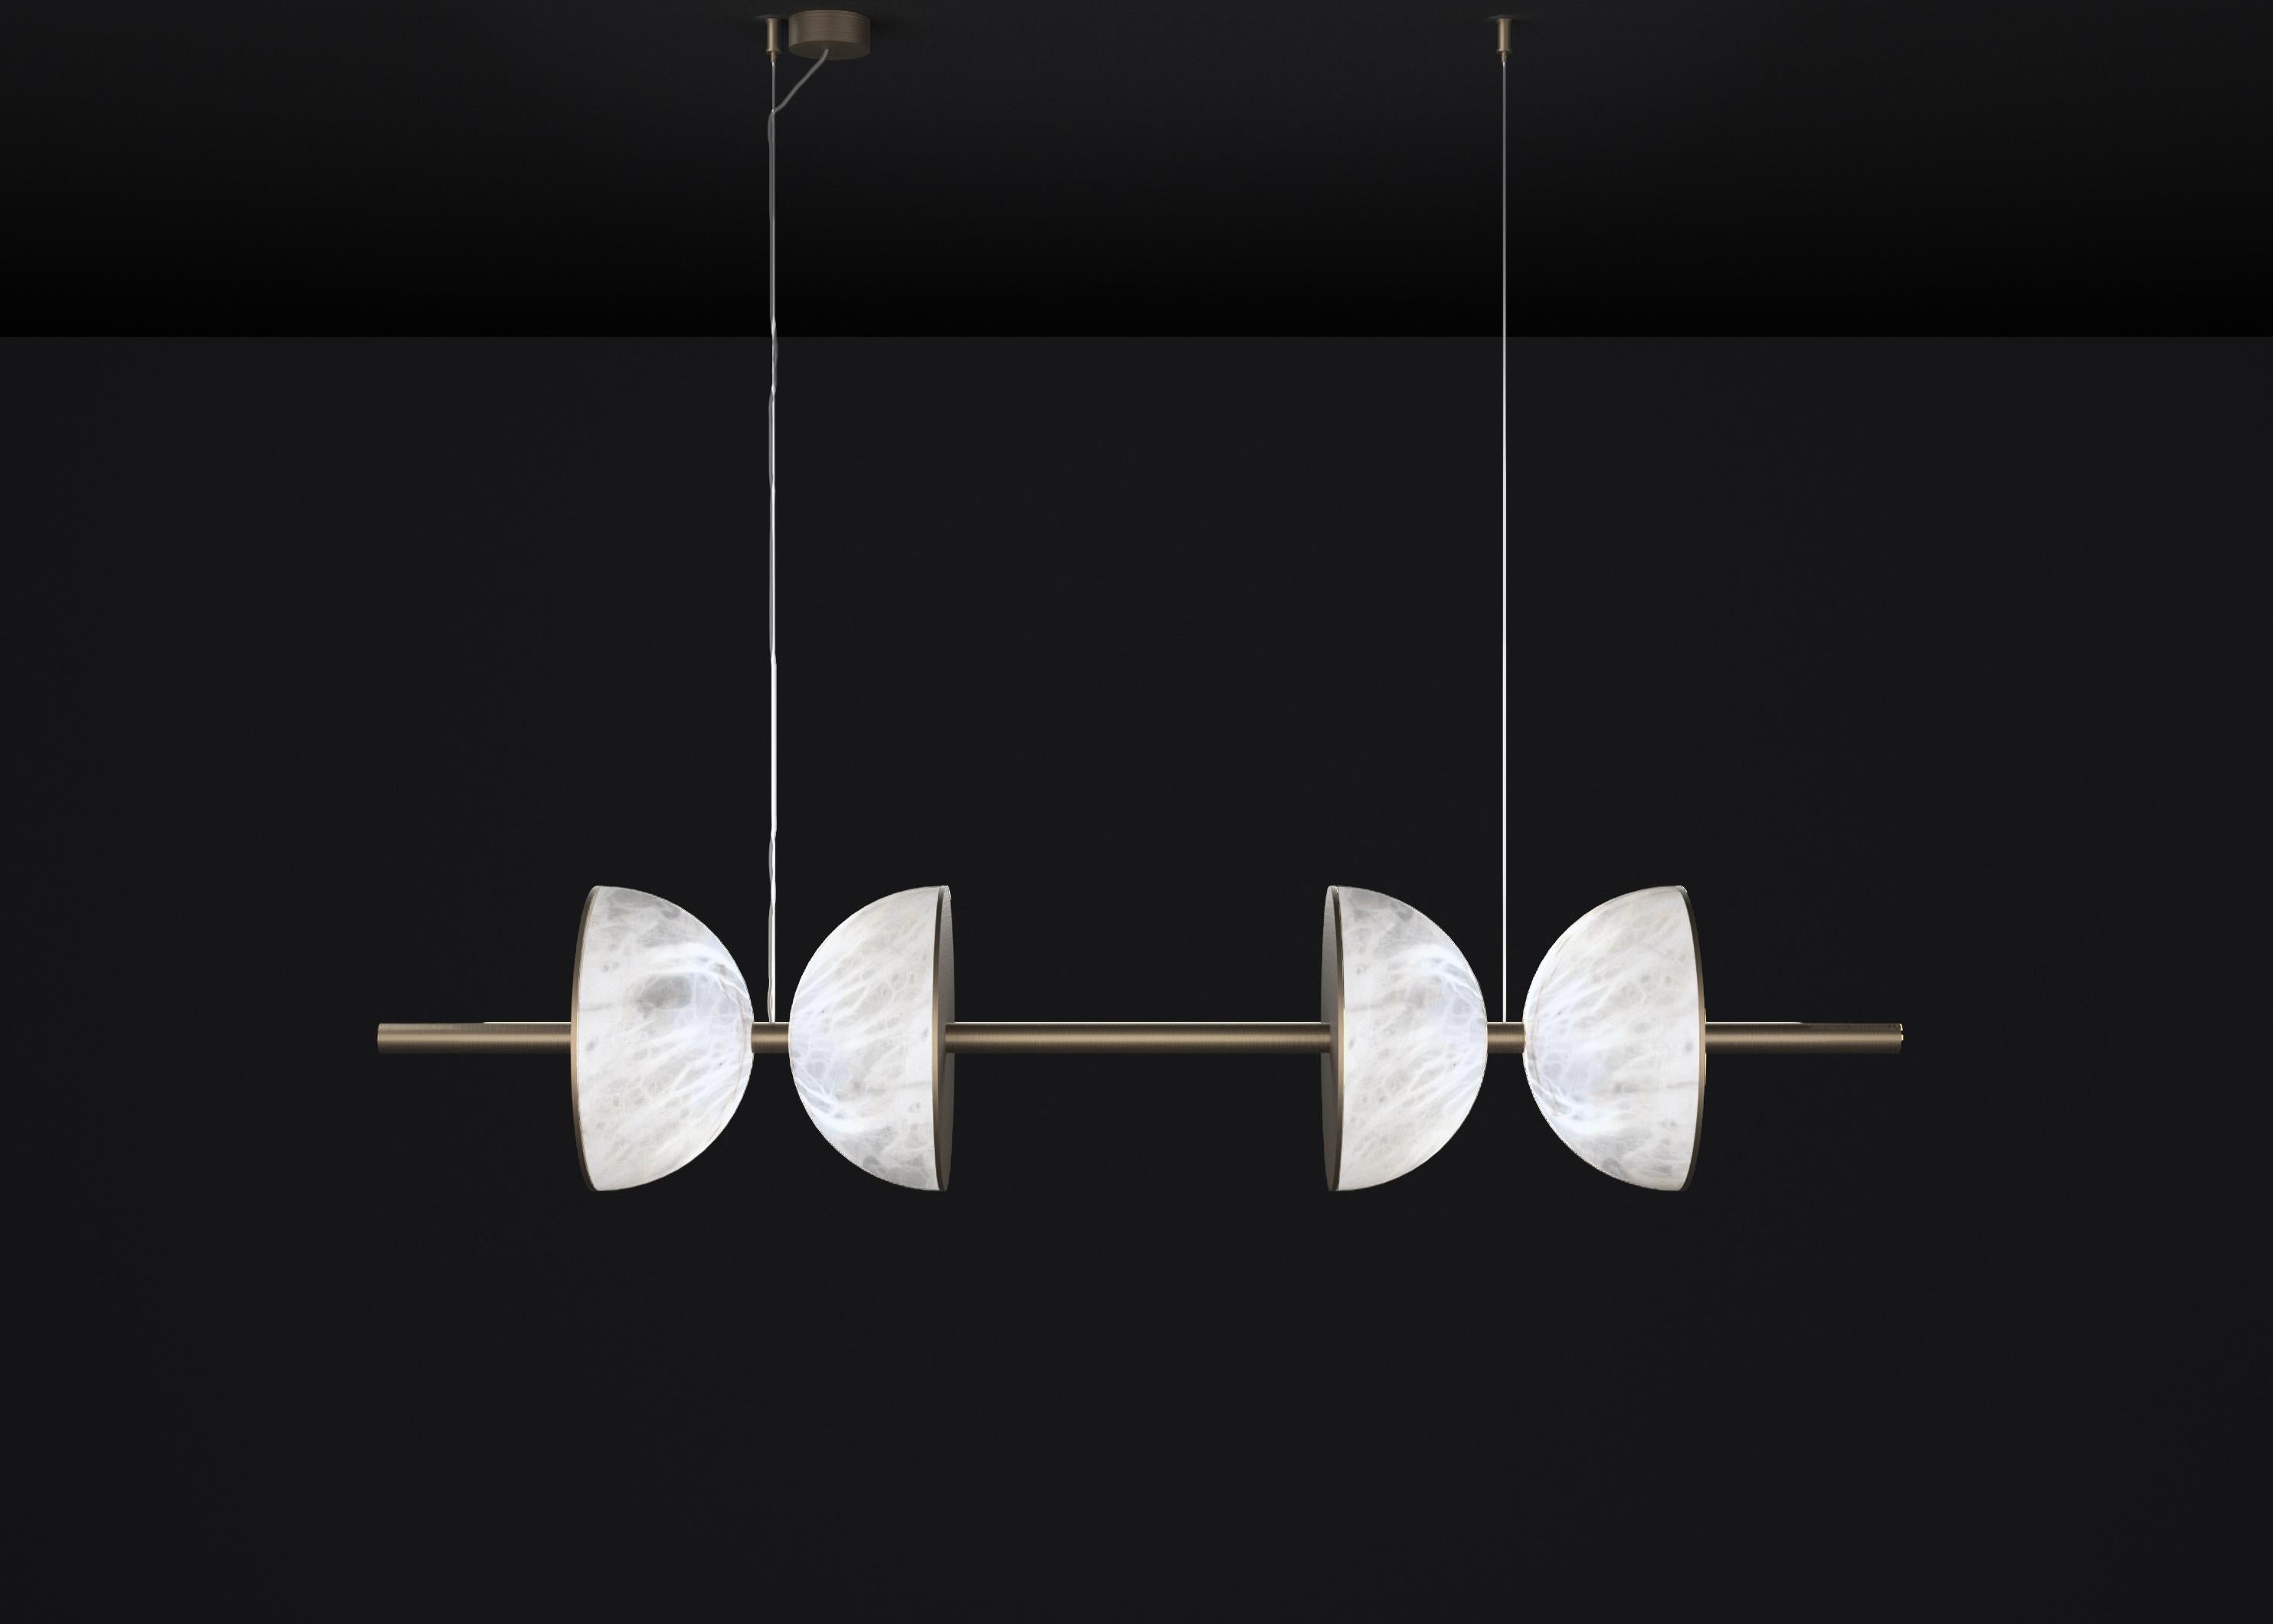 Ermes Burnished Metal And Alabaster Pendant Light 2 by Alabastro Italiano
Dimensions: D 30 x W 150 x H 300 cm.
Materials: White alabaster and brushed burnished metal.

Available in different finishes: Shiny Silver, Bronze, Brushed Brass, Ruggine of